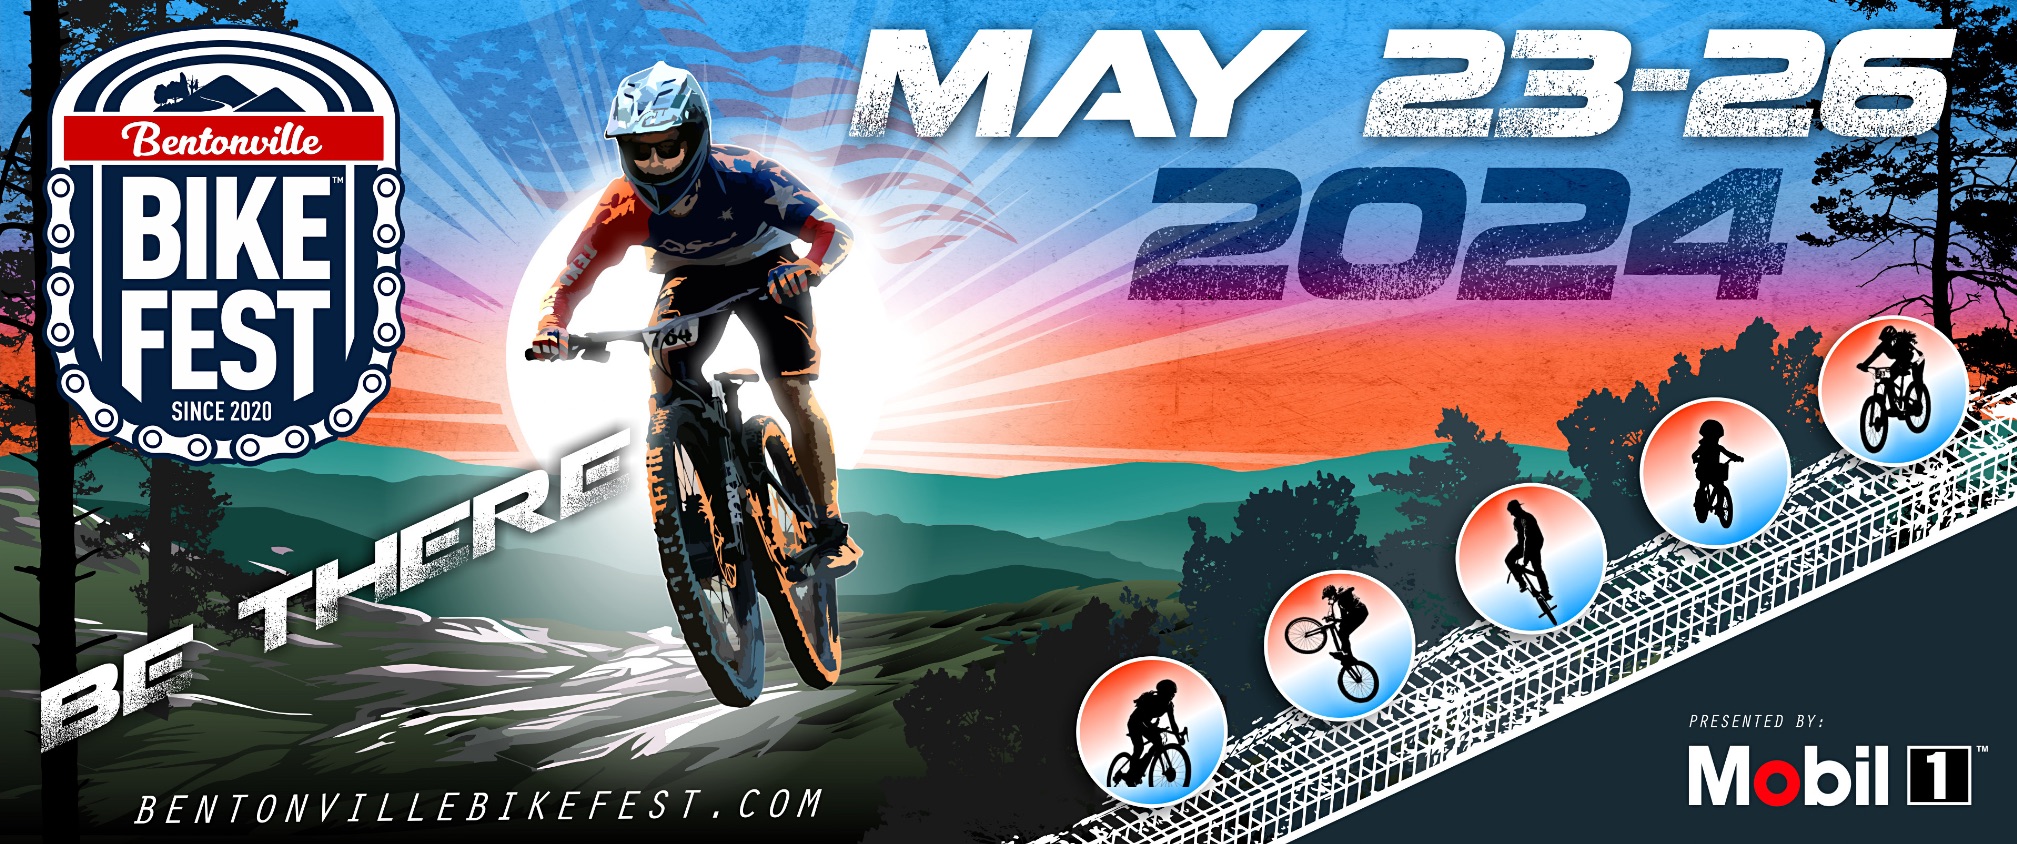 Bentonville BikeFest May 24-26 2024, See you there